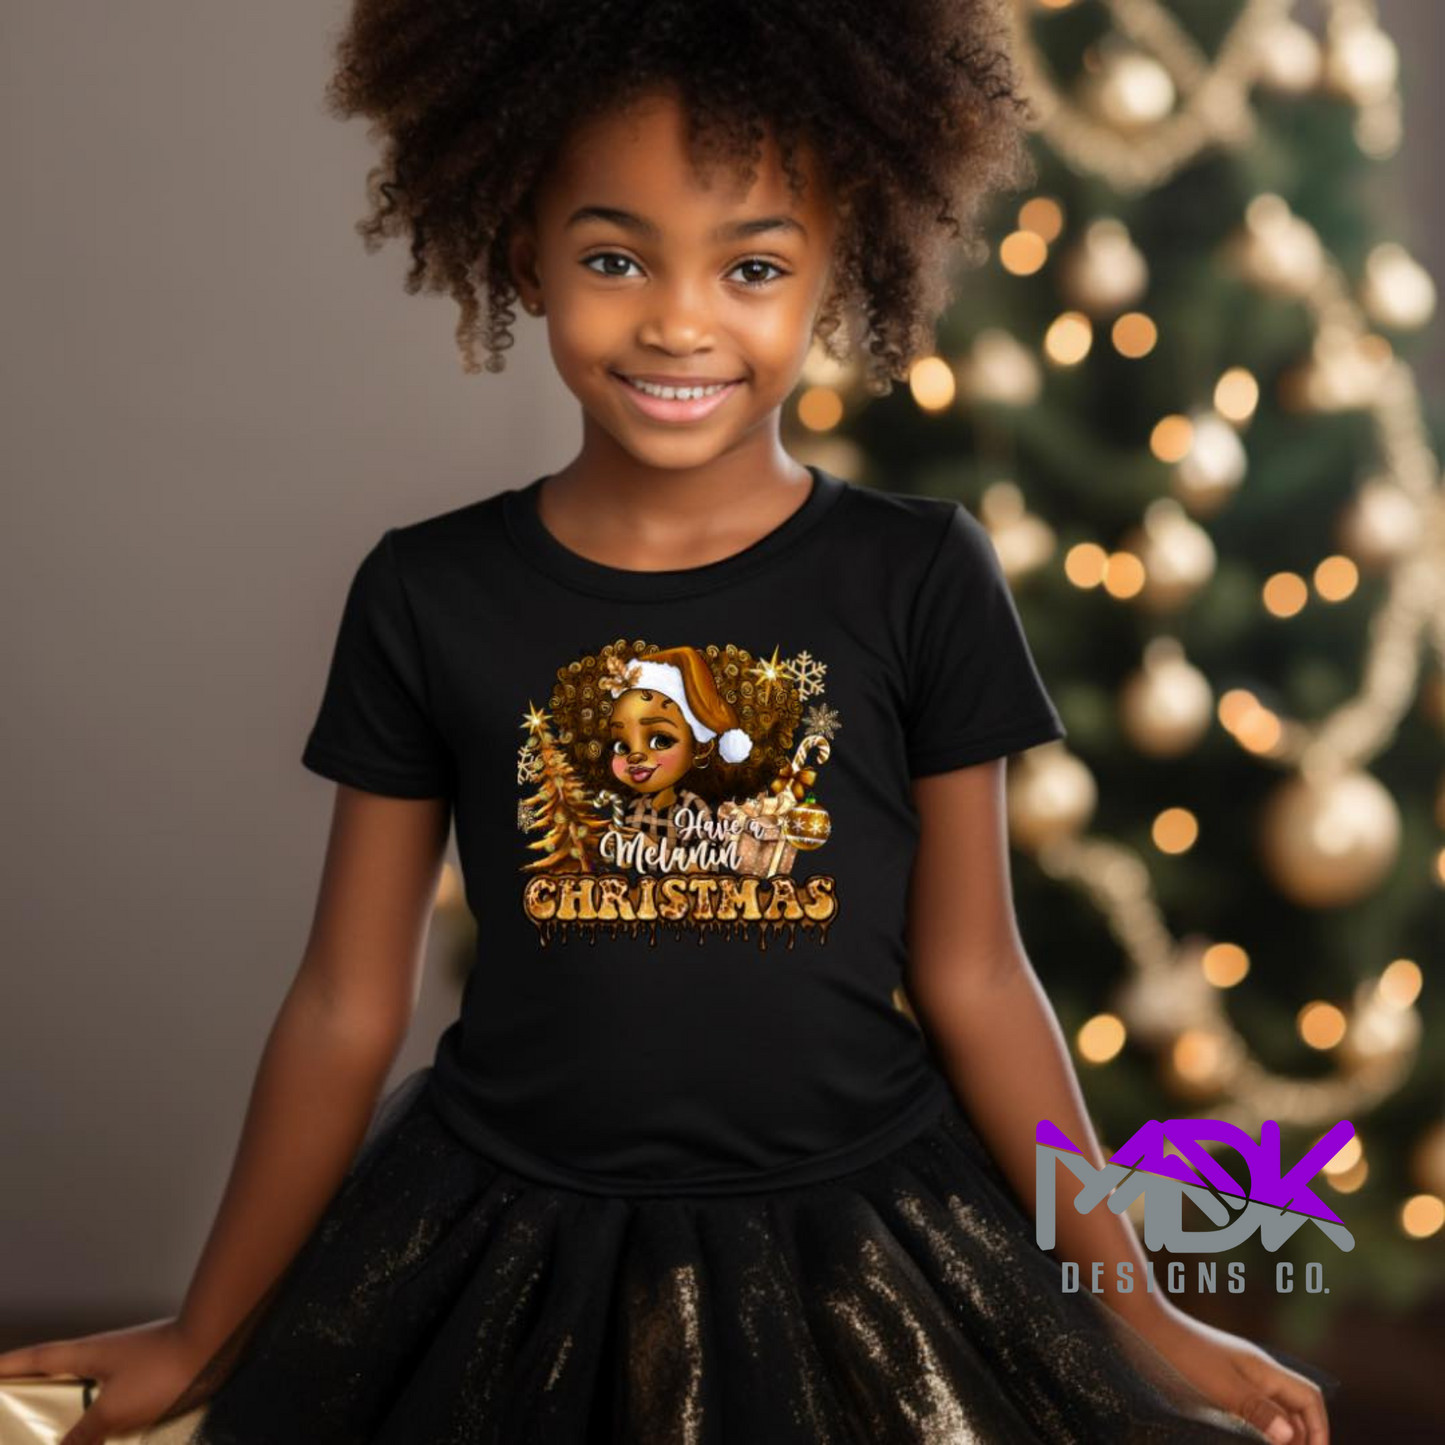 Have a Melanin Christmas - Youth